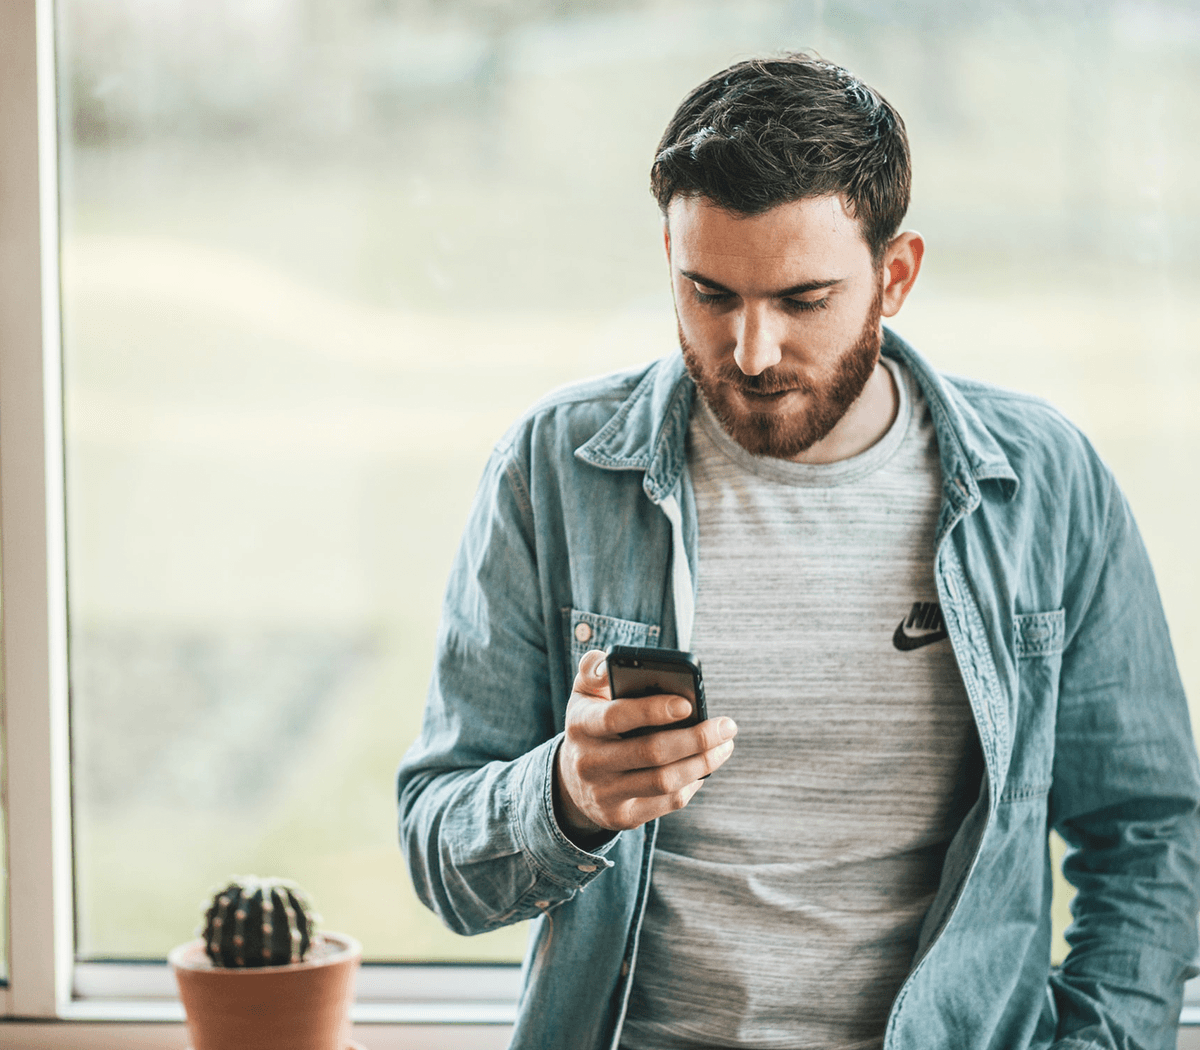 Use these SMS marketing statistics to gain a better understanding of how you can improve reach, saturation and brand awareness in 2021.